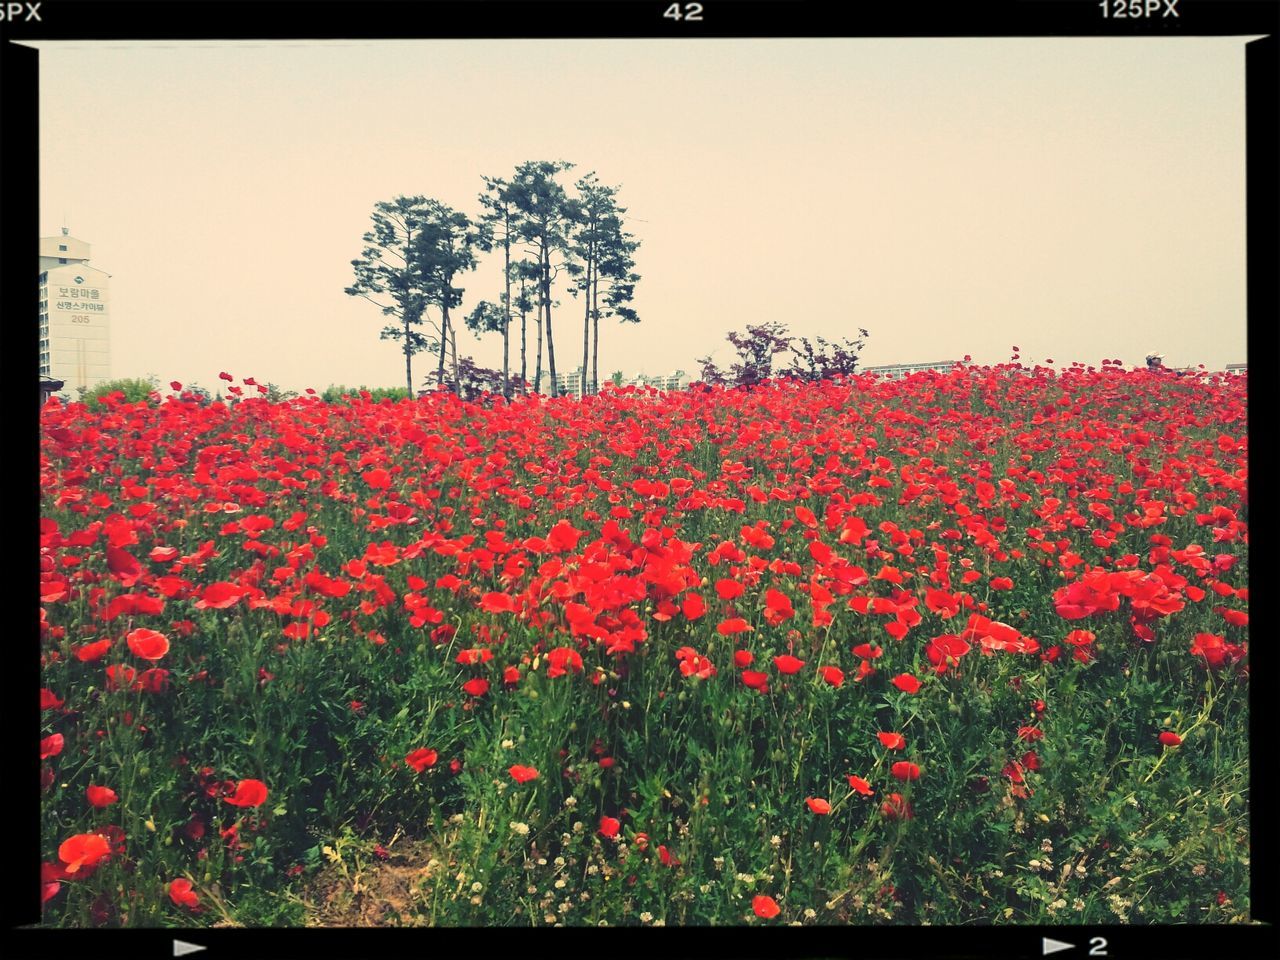 flower, transfer print, red, freshness, growth, beauty in nature, auto post production filter, nature, fragility, field, clear sky, plant, blooming, tranquility, sky, tree, tranquil scene, petal, landscape, outdoors